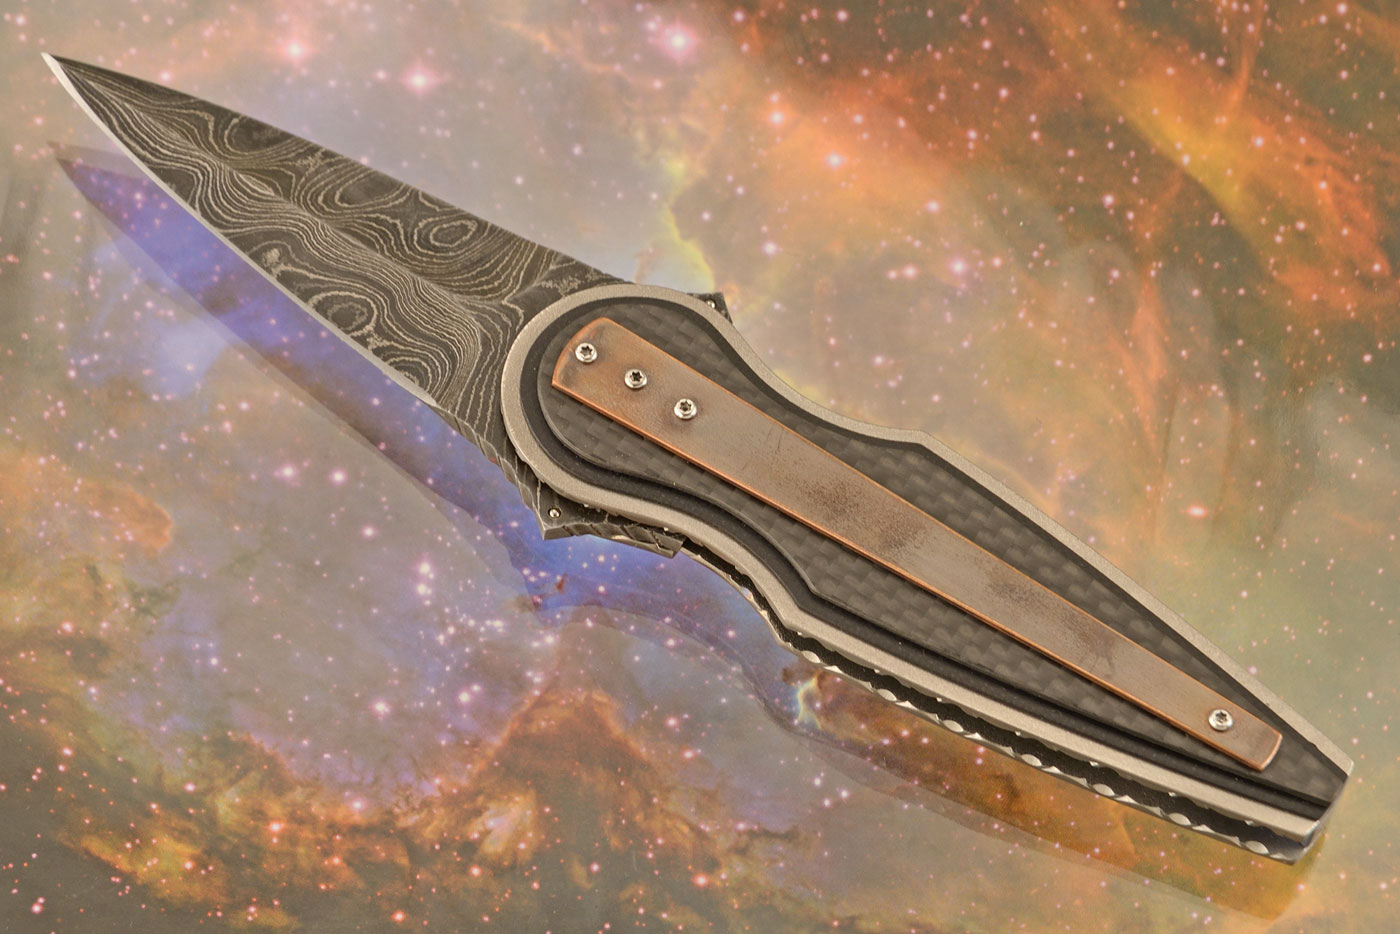 Solo Front Flipper with Copper, Carbon Fiber and Damascus